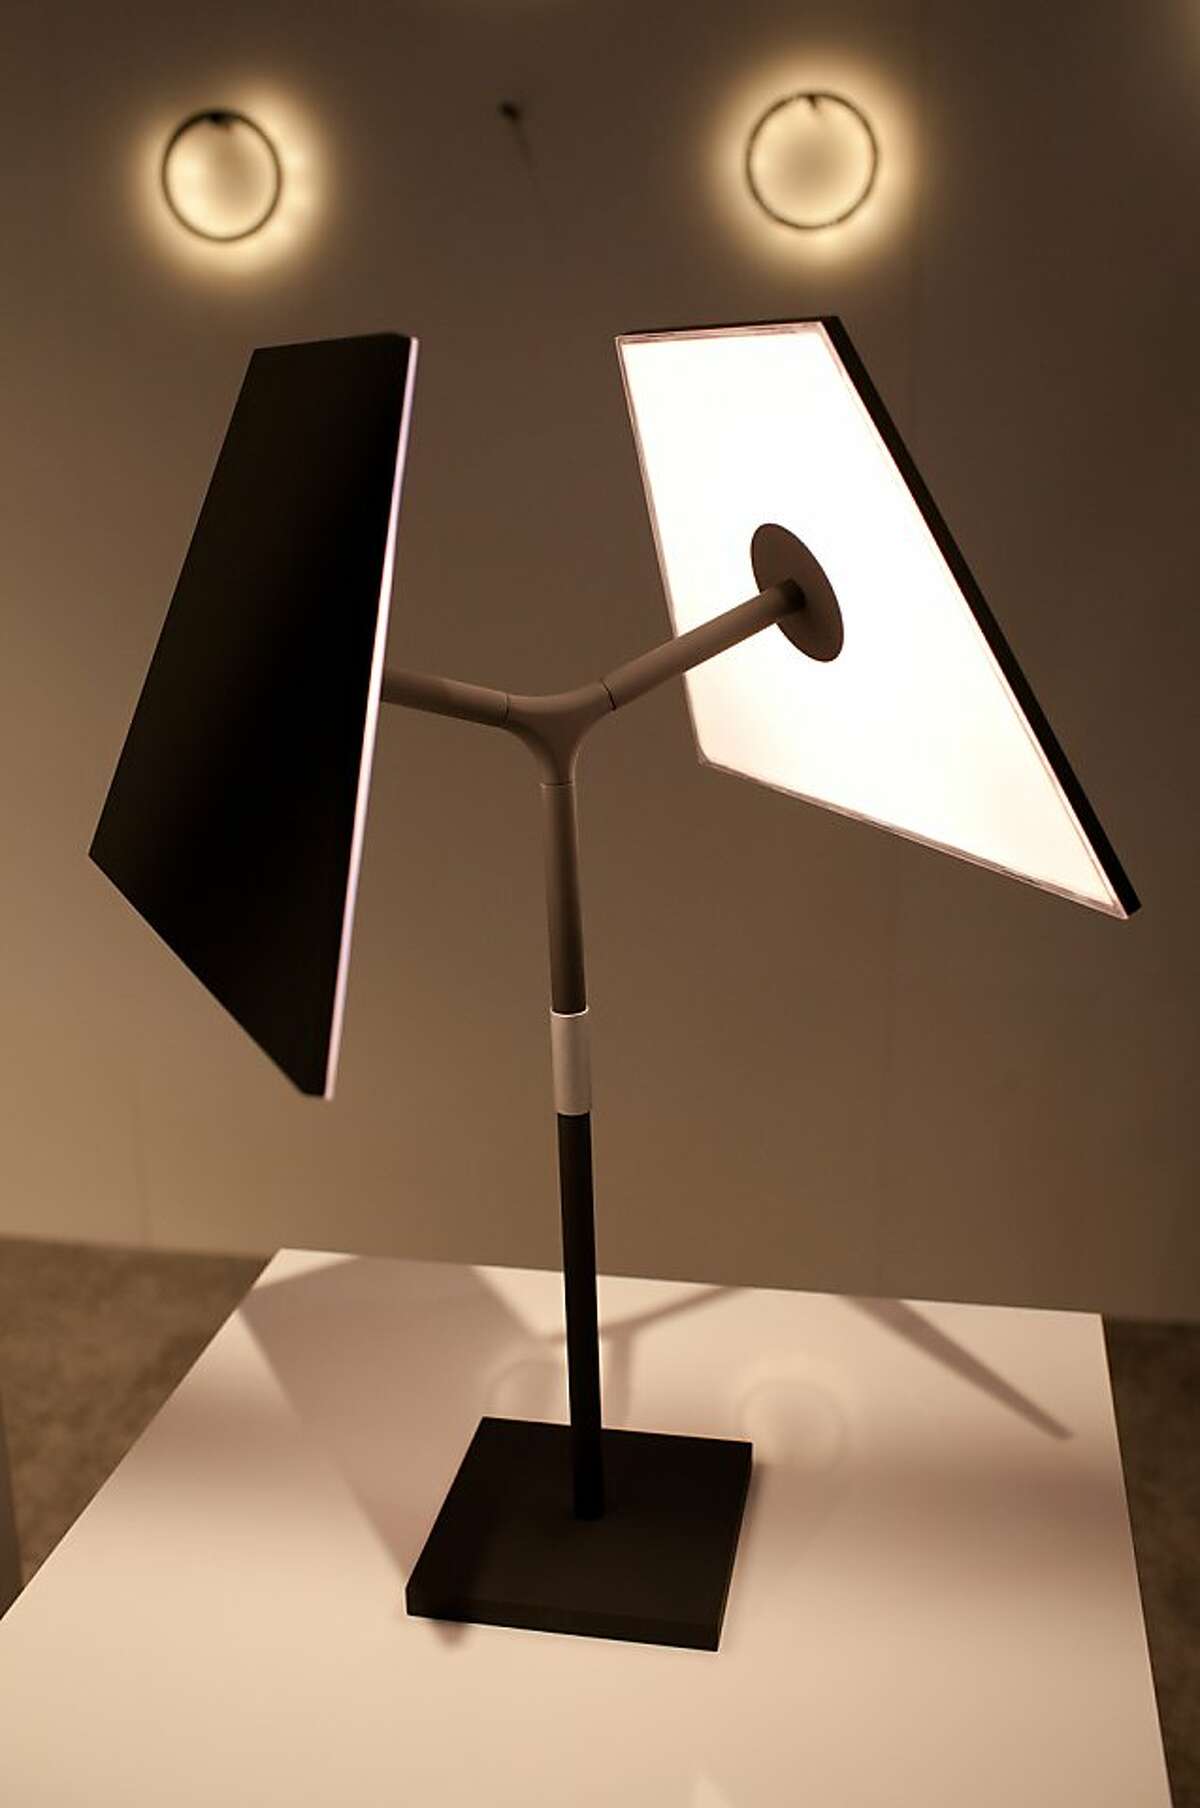 Symtra Lamp from Humanscale from New York at the Javitz Center in Manhattan, New York on May 20, 2012.